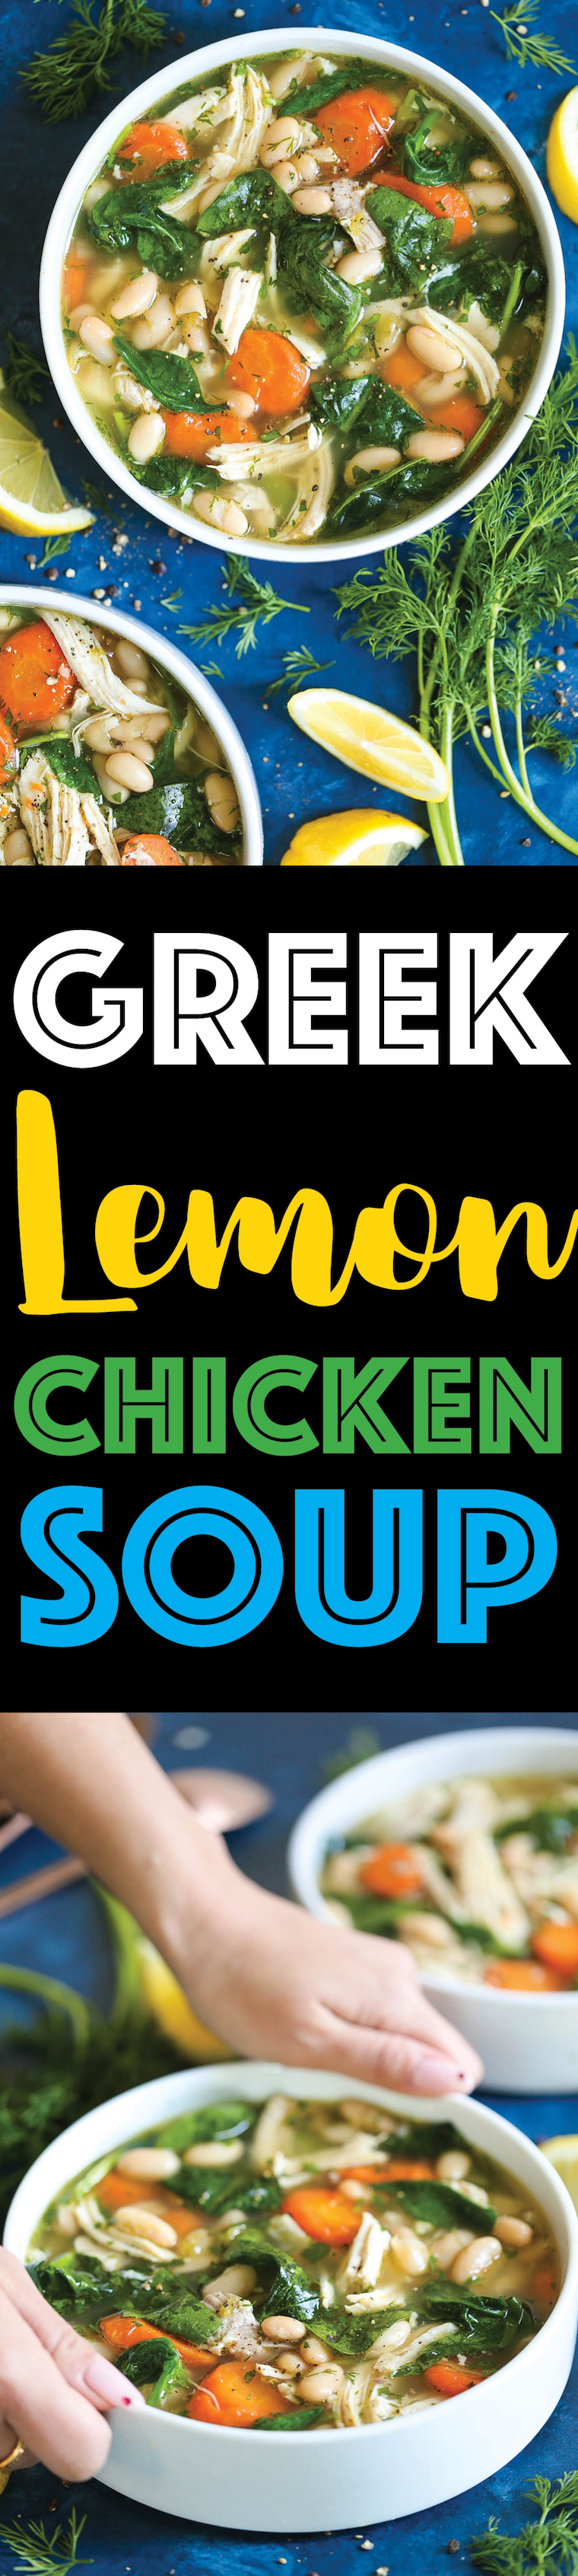 Greek Lemon Chicken Soup - A quick and easy 30 minute chicken soup – so cozy and comforting! We swap out the noodles for cannellini beans for added protein and fiber with way less calories! And the added lemon juice is so refreshing and vibrant!